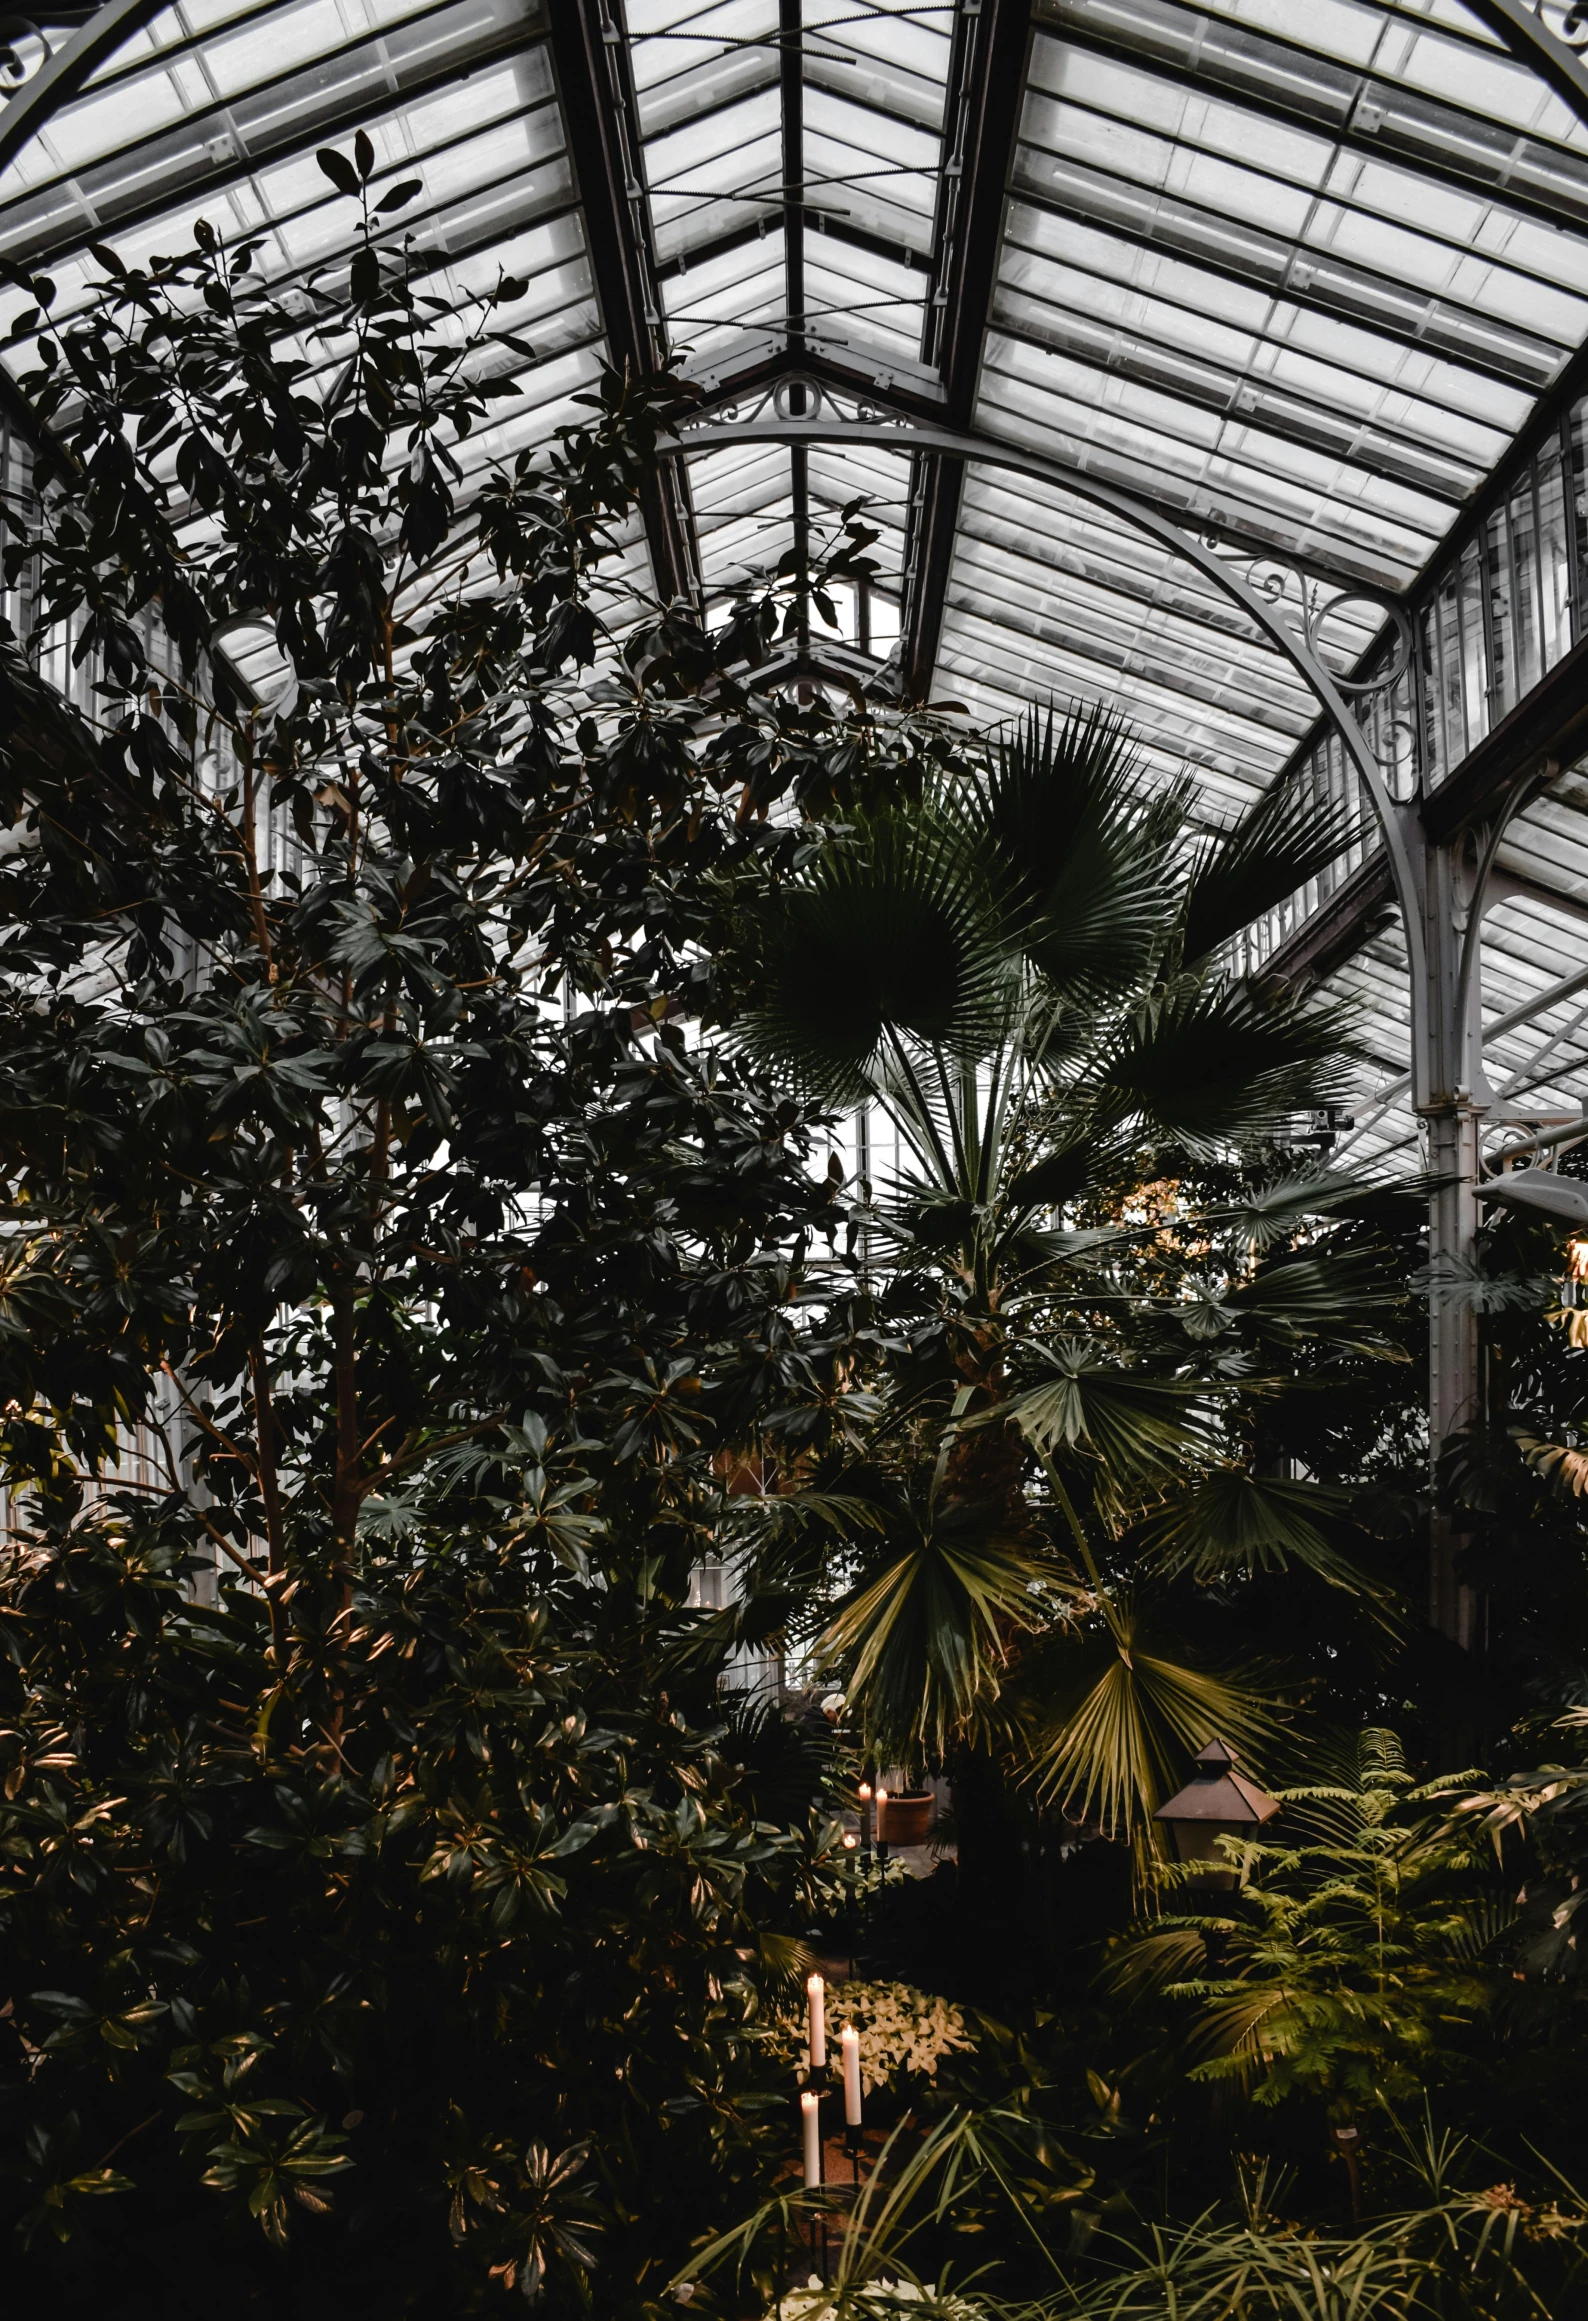 a greenhouse filled with lots of plants and trees, an album cover, unsplash contest winner, dark academia aesthetic, tall ceiling, as seen from the canopy, royal garden landscape